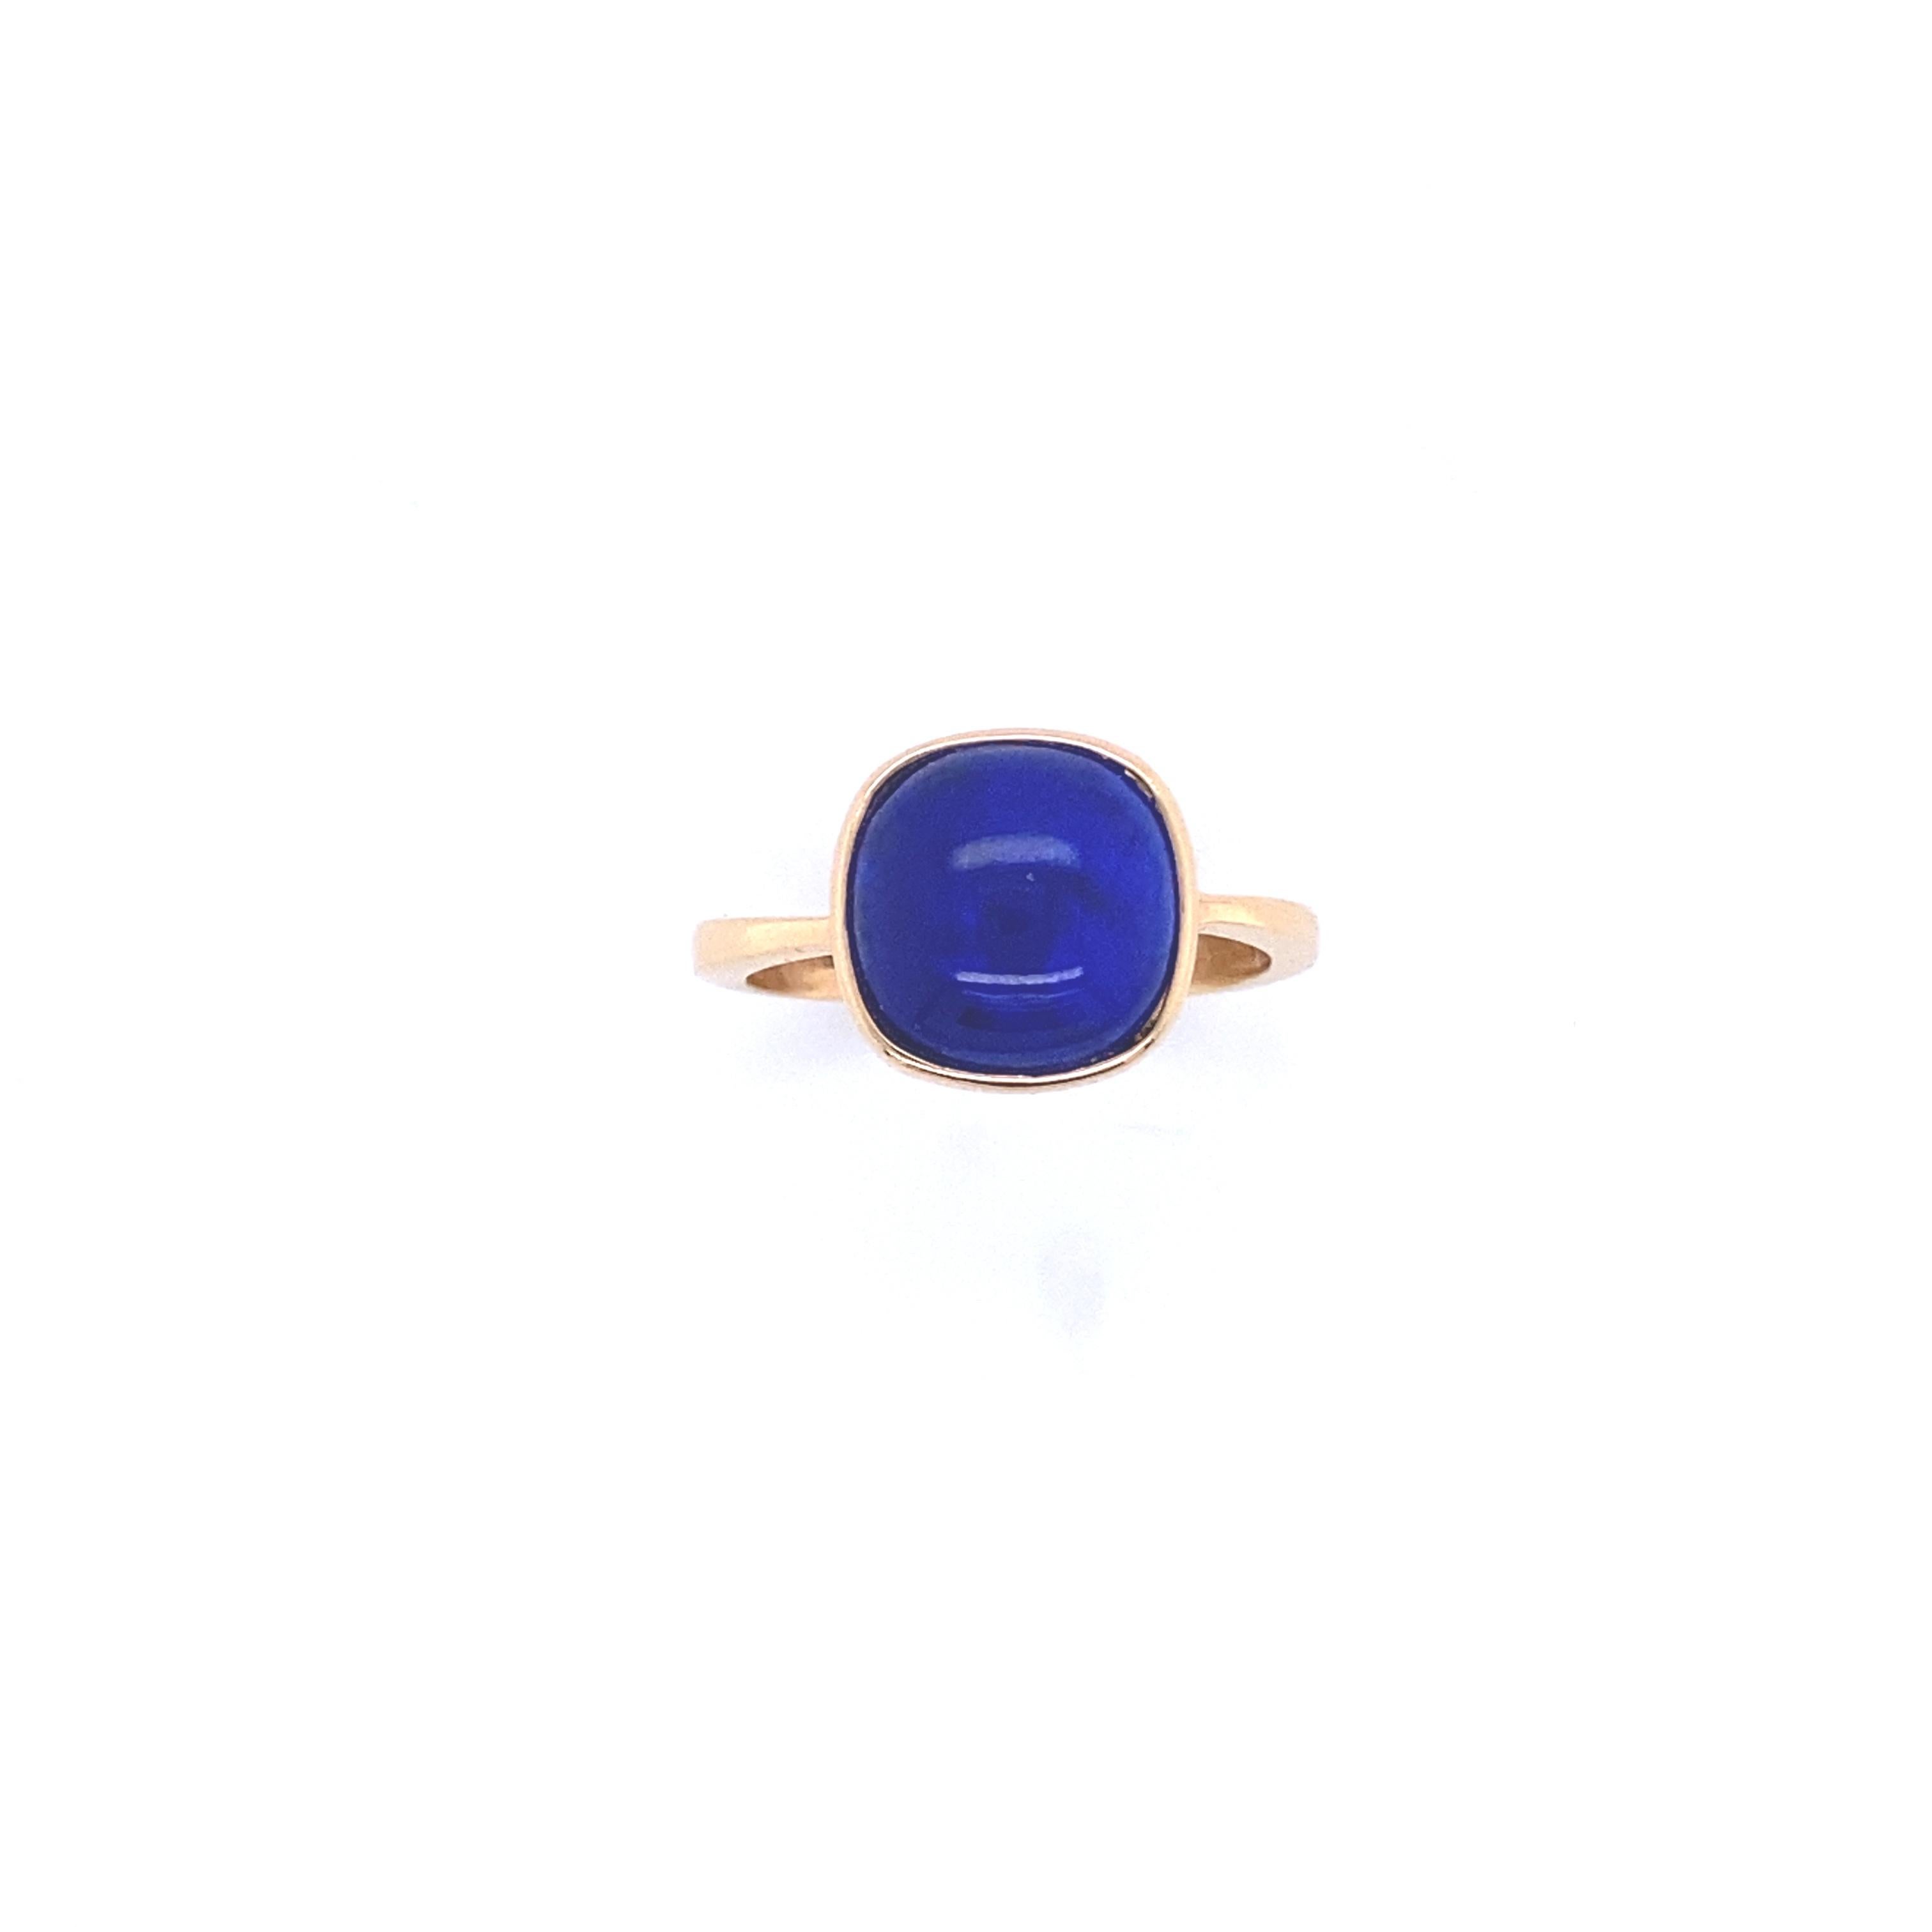 Women's or Men's Rose Gold Cocktail Ring with a Cabochon Lapis Lazuli For Sale